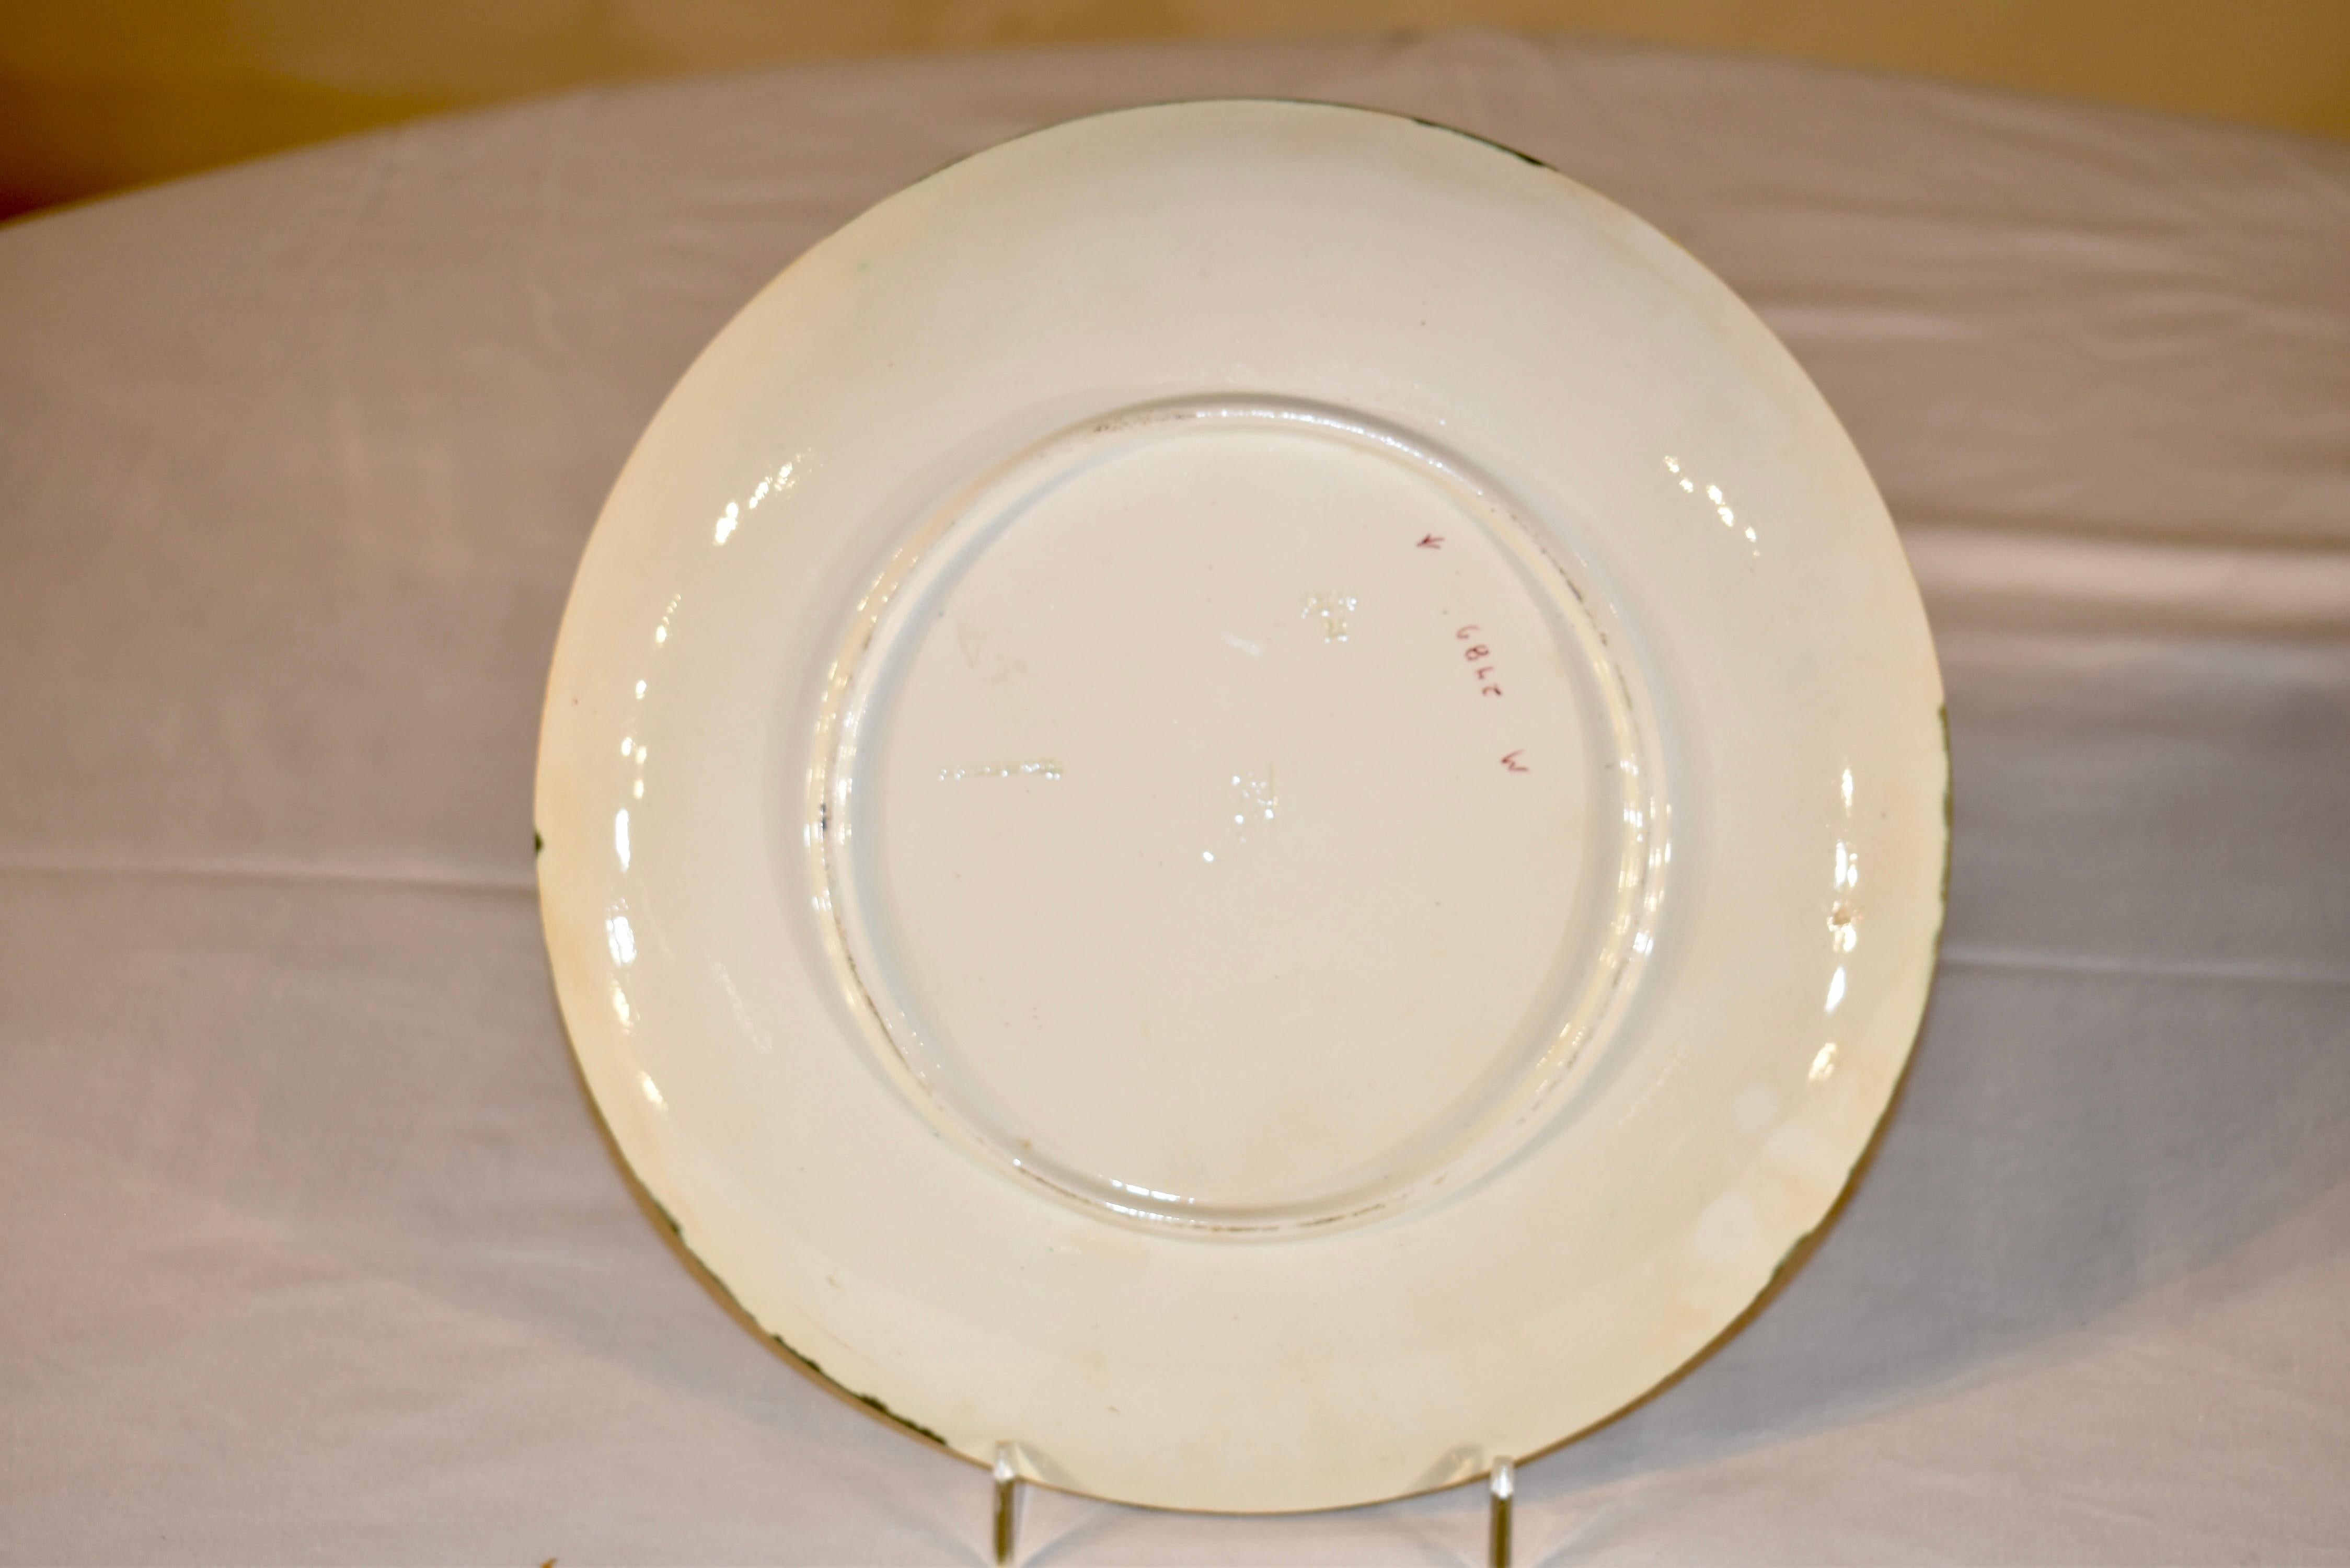 Glazed 19th Century Wedgwood Majolica Plate For Sale